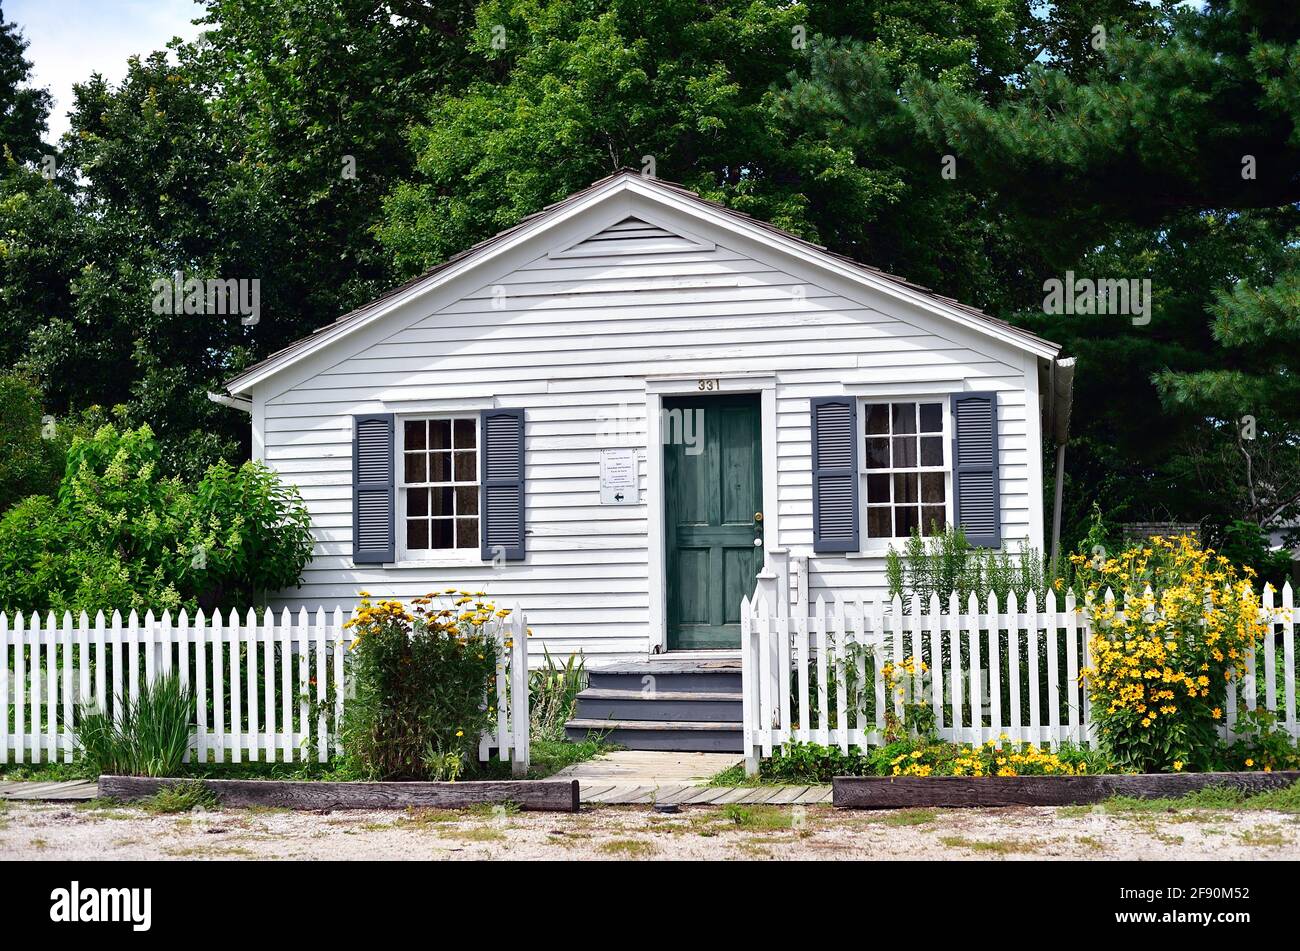 Galesburg, Illinois, USA. The modest home that was the birthplace of Carl Sandburg, famed Pulitzer Prize winning poet and author. Stock Photo